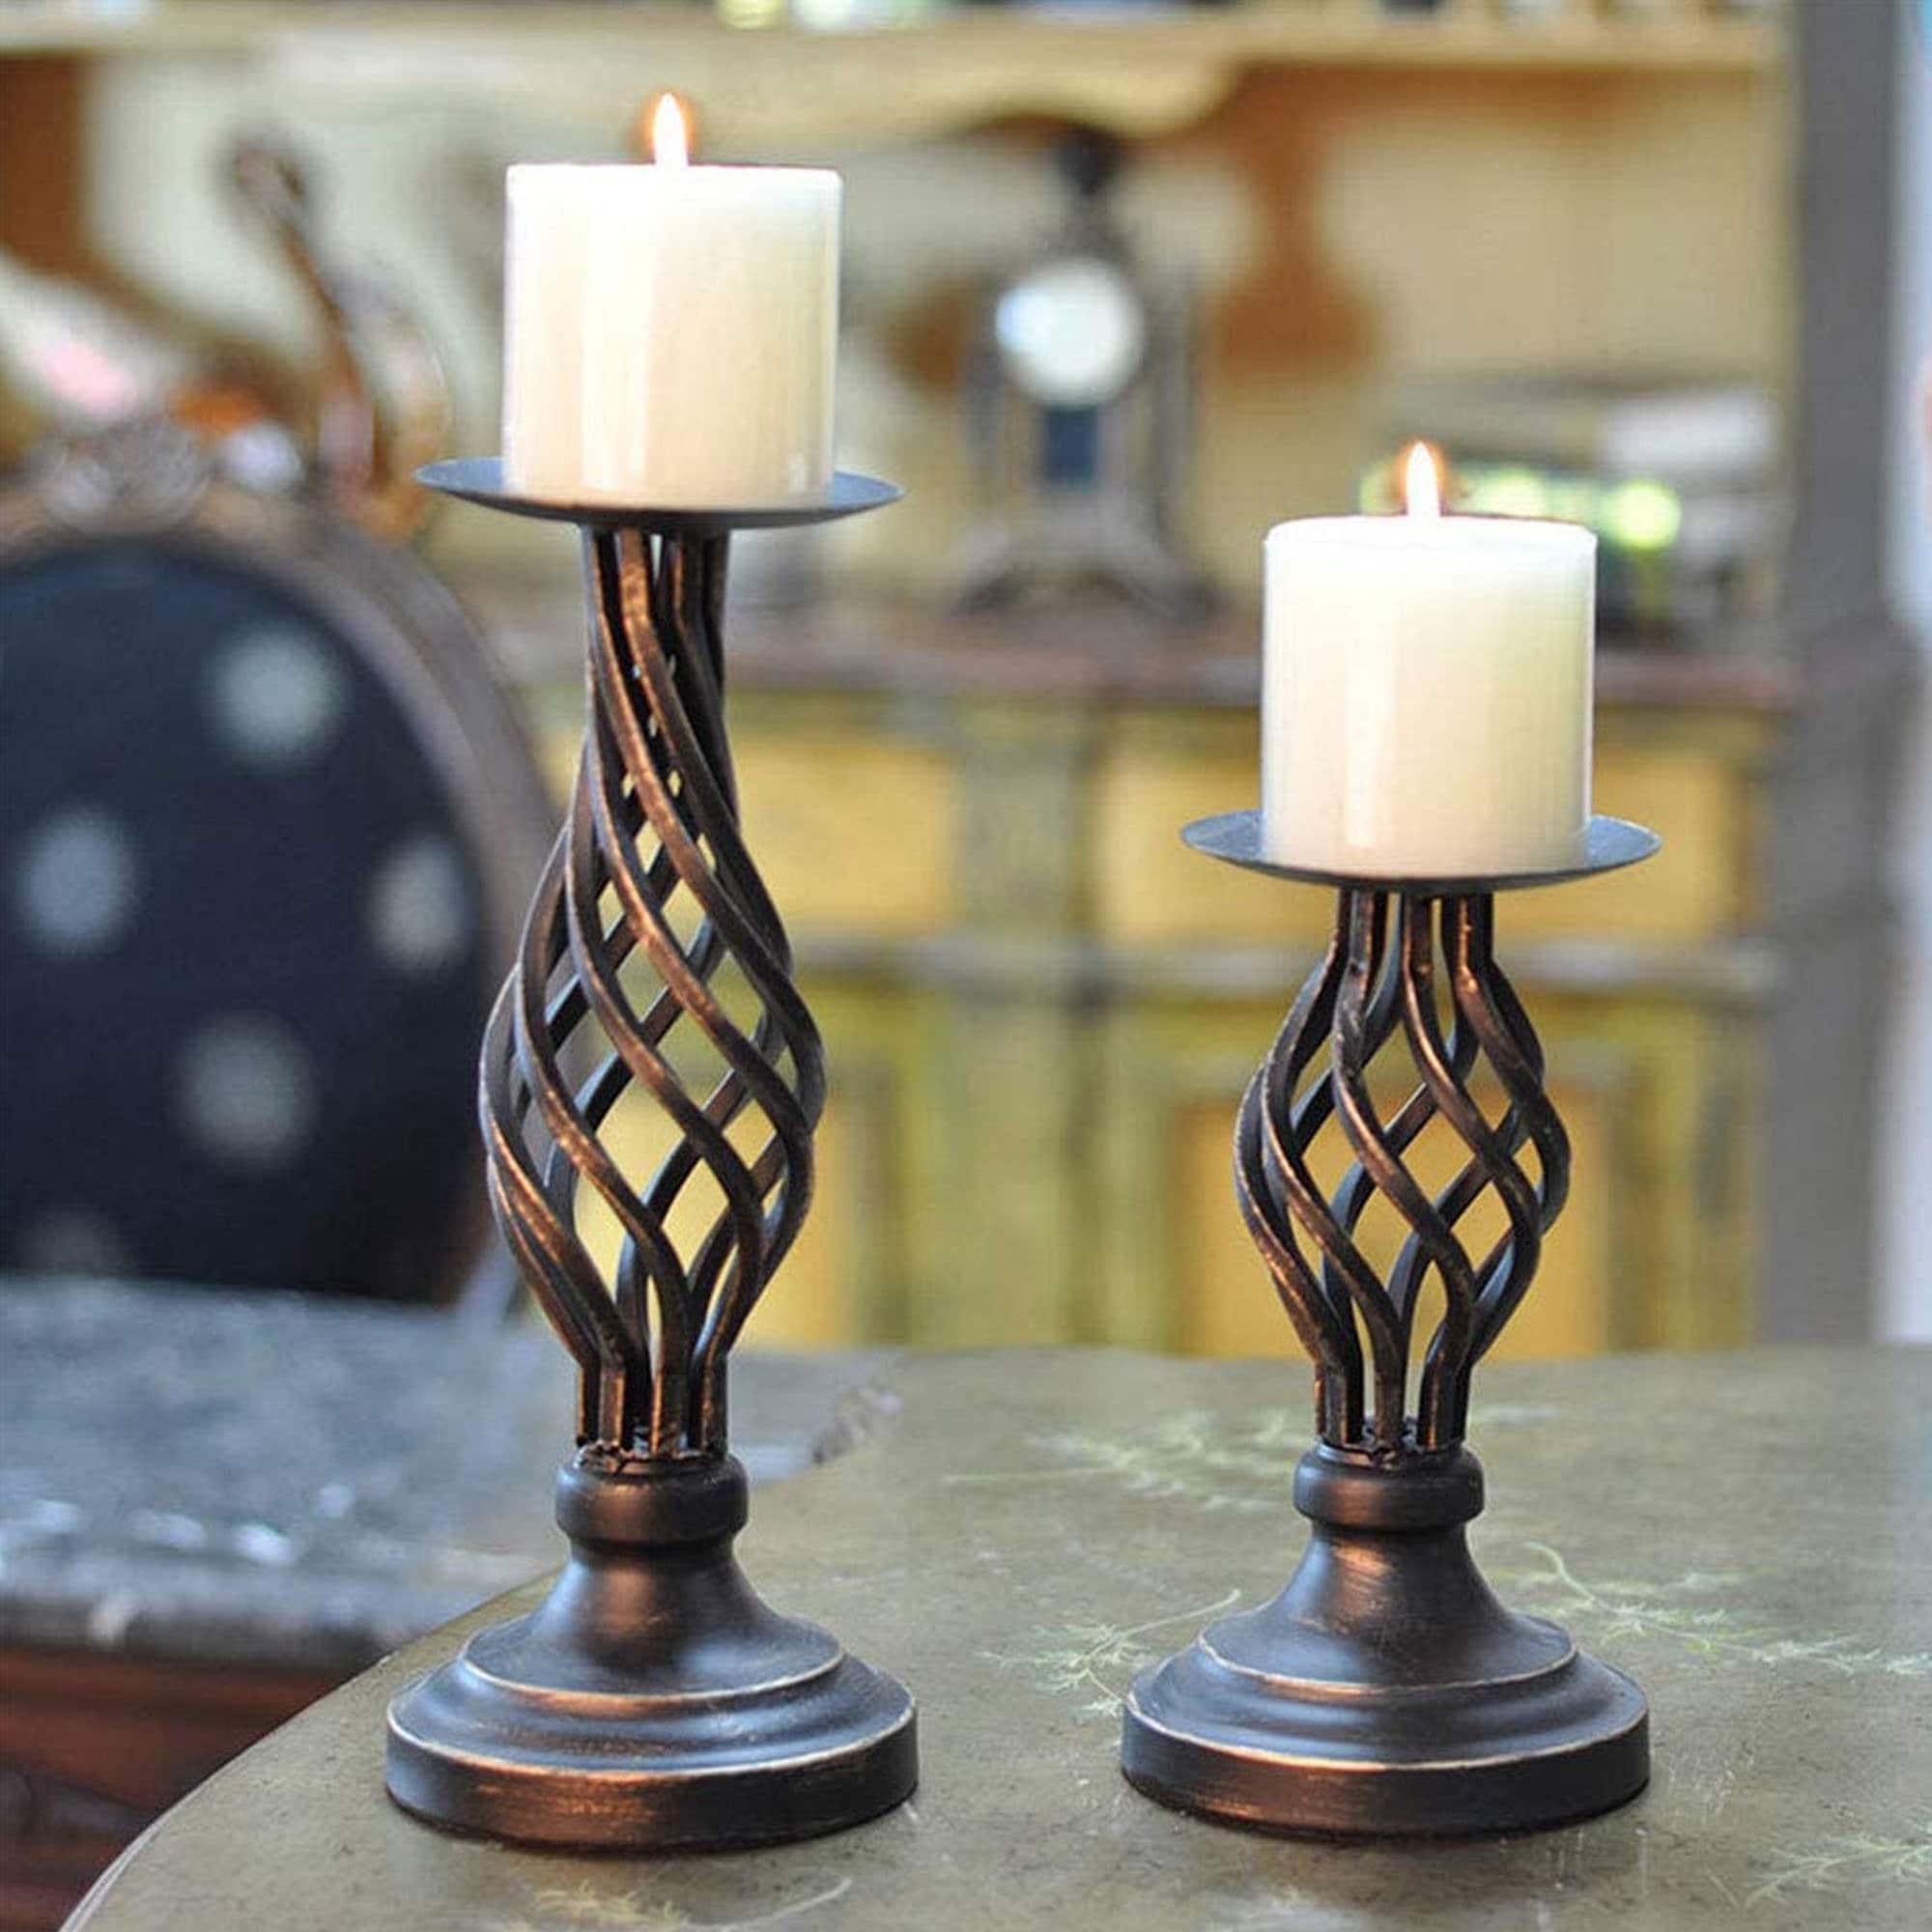 Details about   Candle Holder Metal Pillar Romantic Candlesticks Home Decorative Candle Stand 